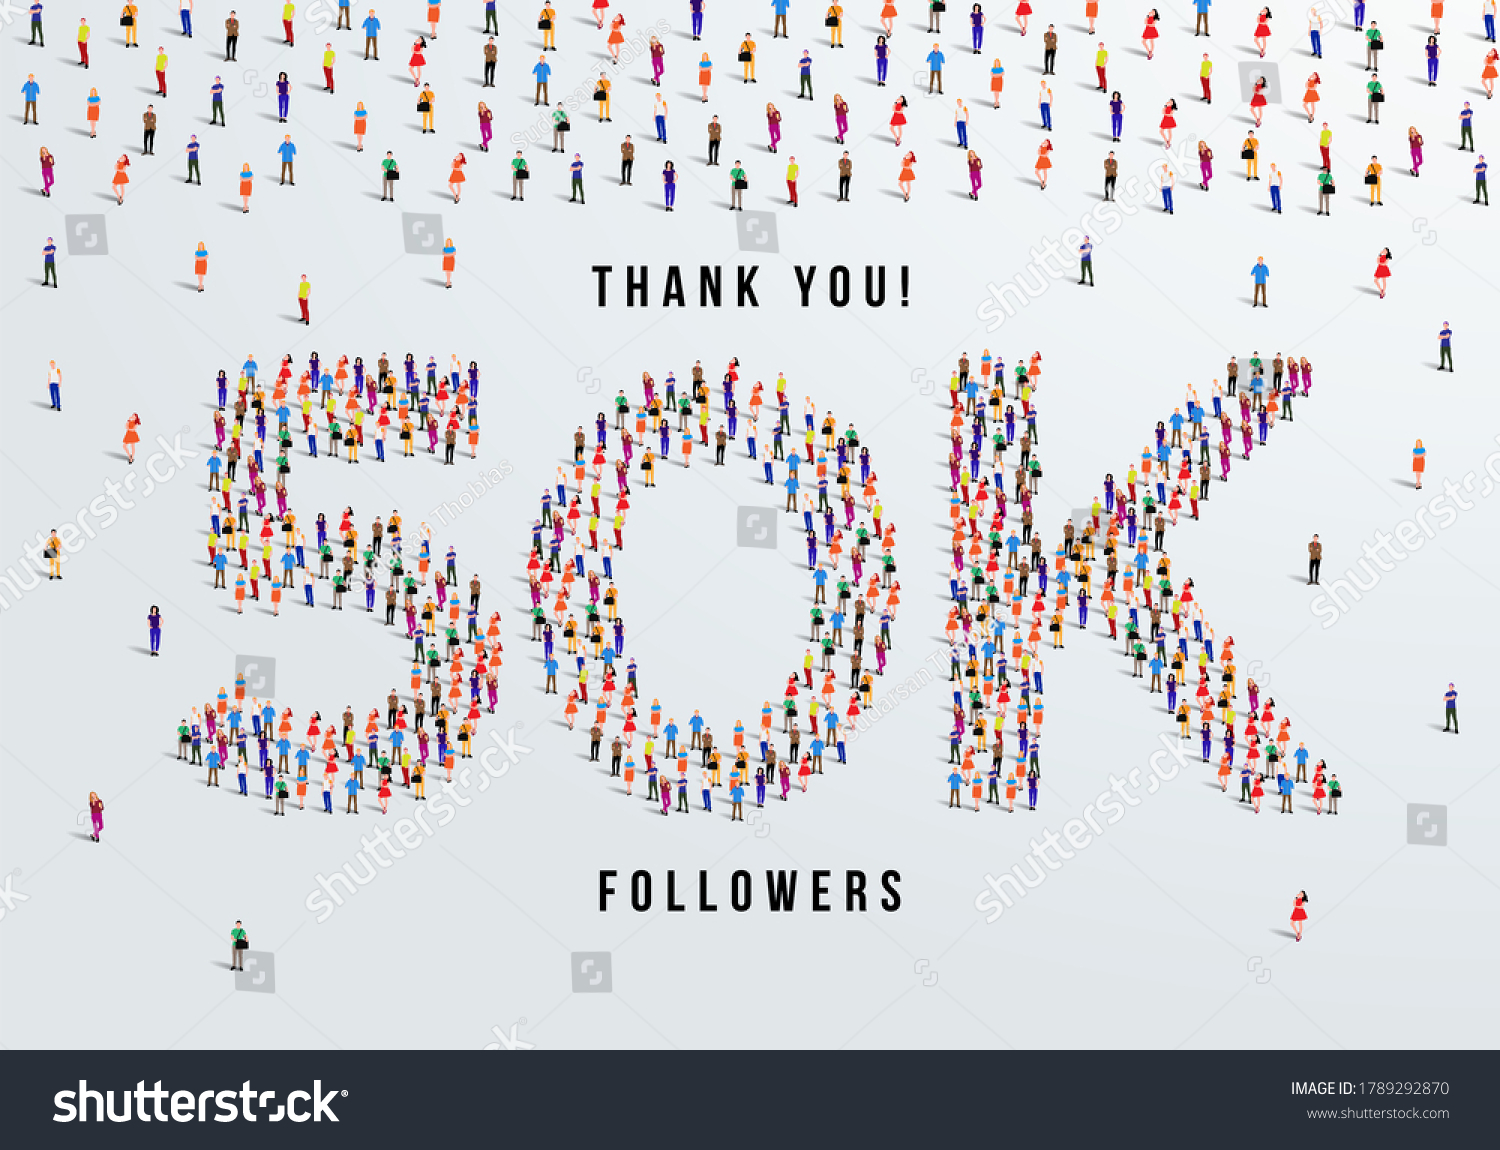 Thank You 50k Or Fifty Thousand Followers Large Royalty Free Stock Vector 1789292870 7848